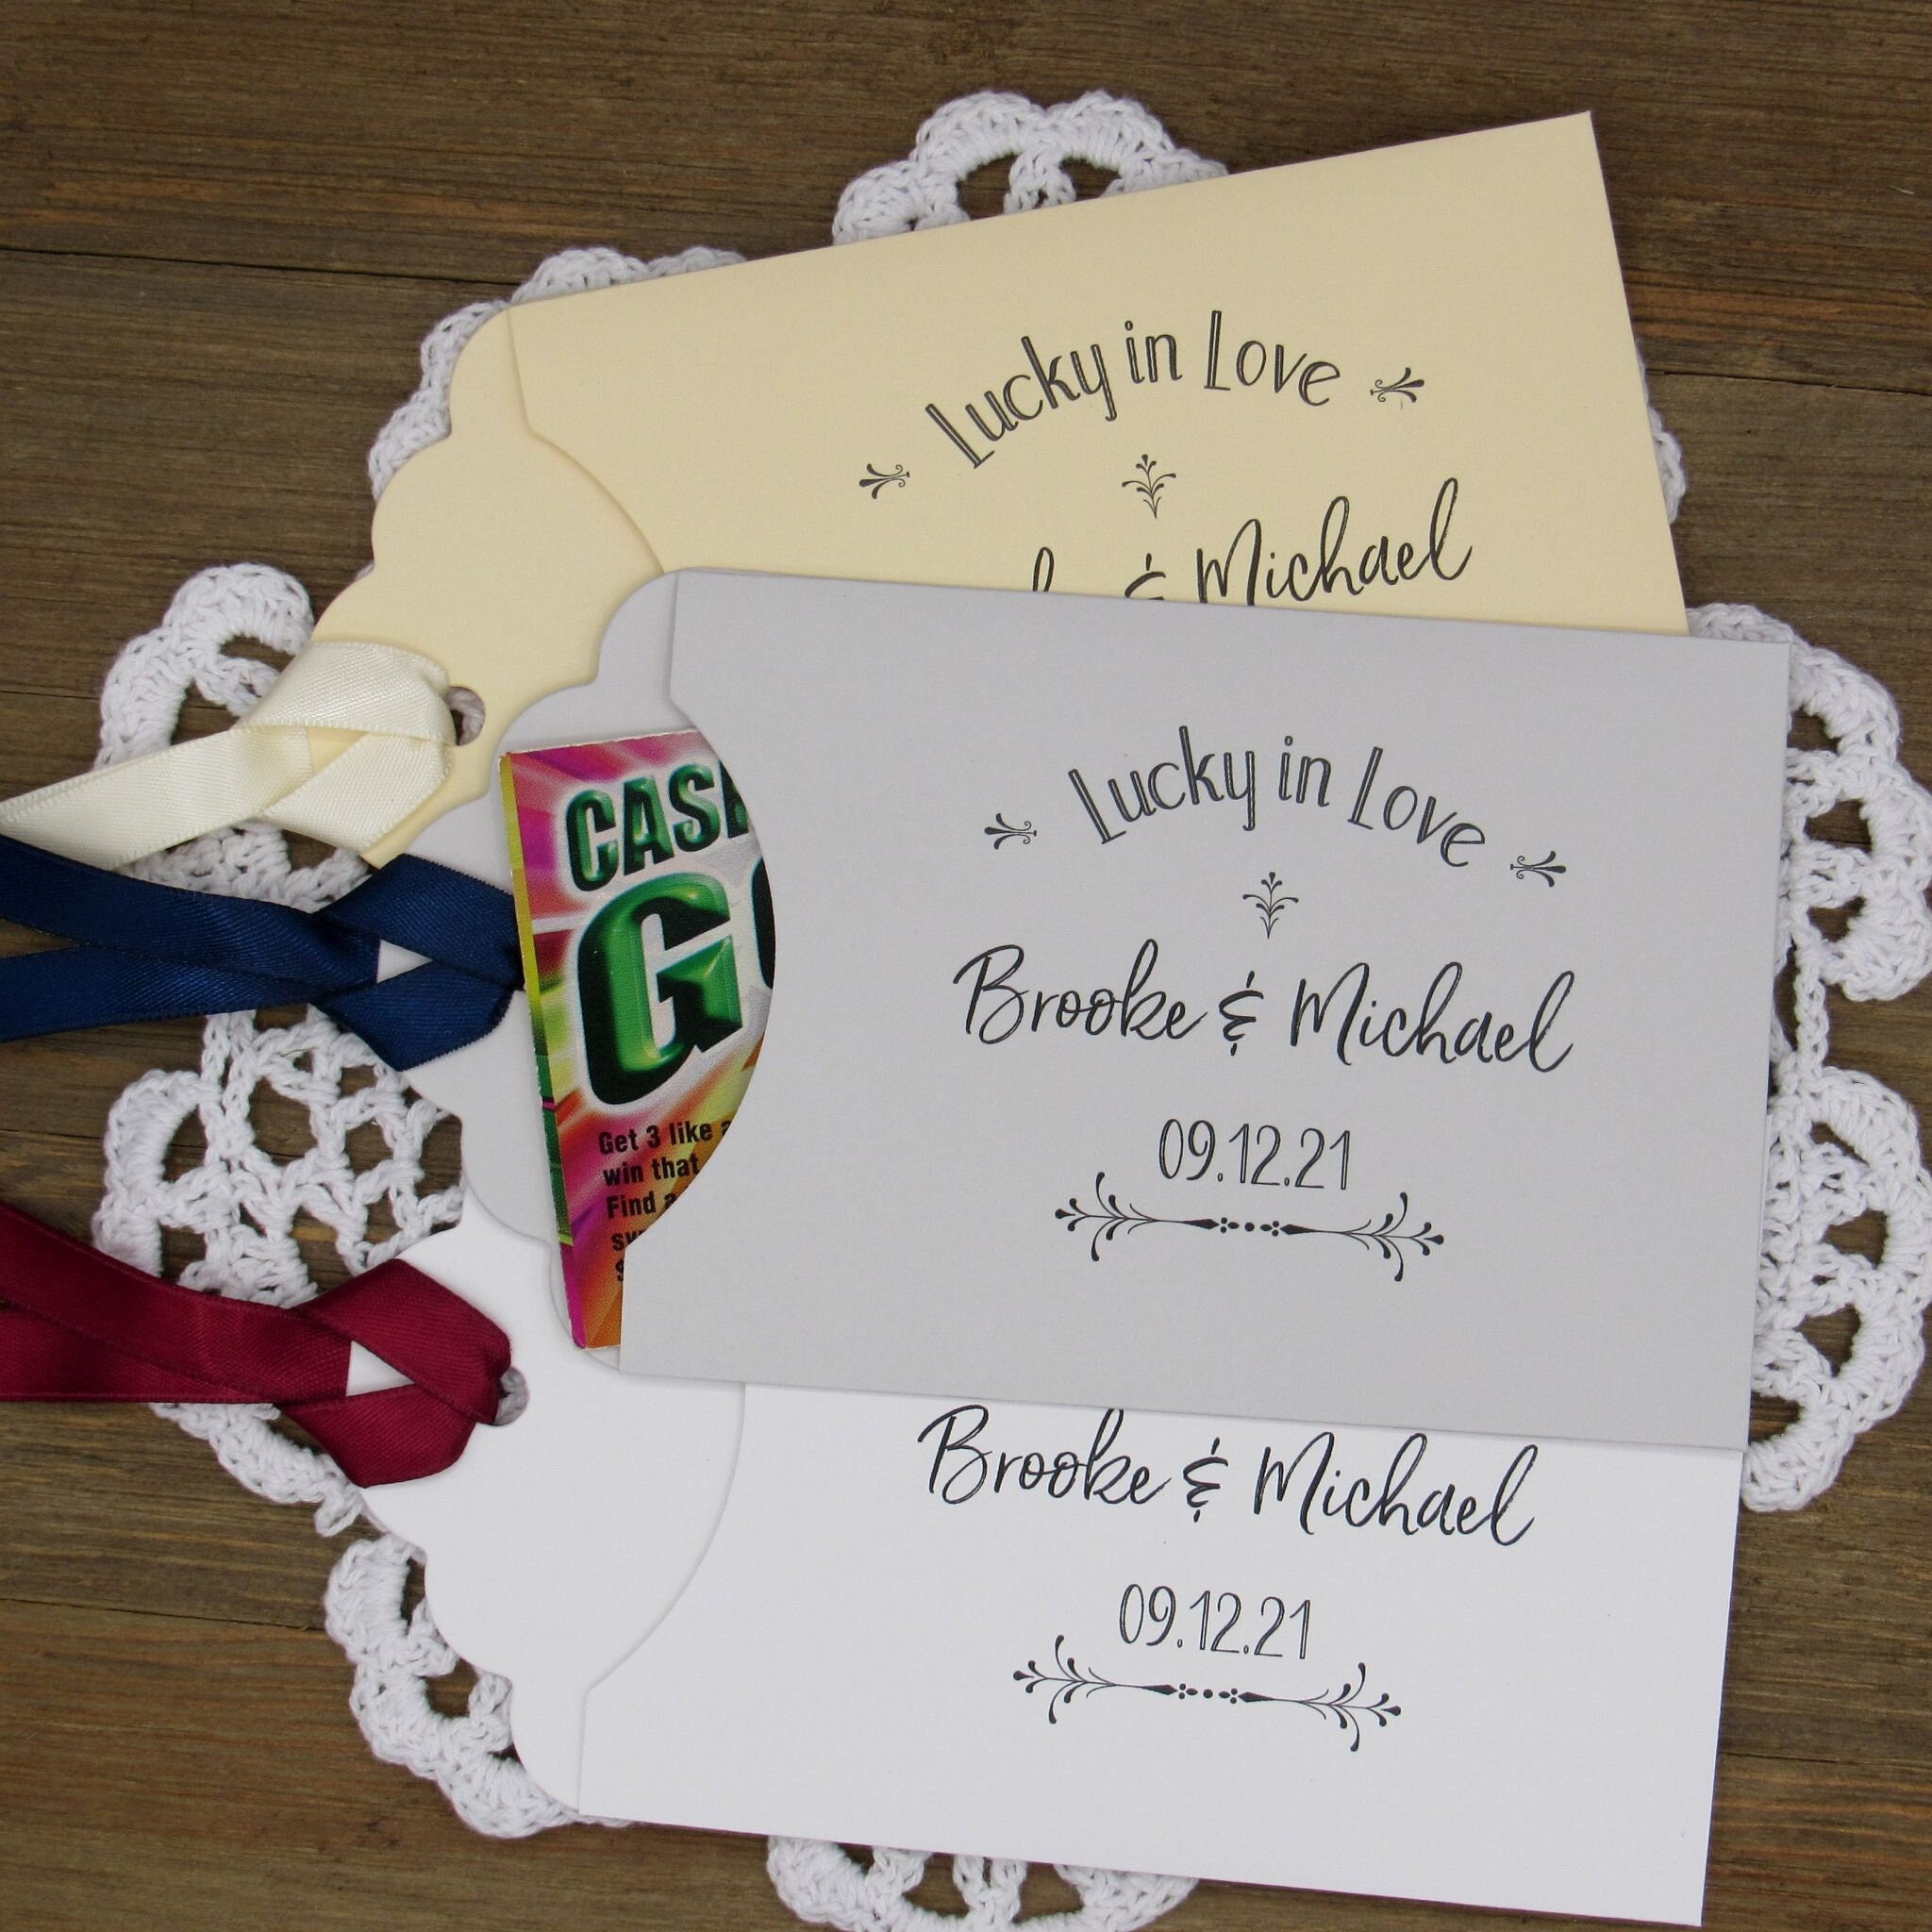 Lucky in love lottery ticket holders for wedding guest favors. Personalized  lucky in love favors perfect for scratch off lotto tickets. by Abbey and  Izzie Designs